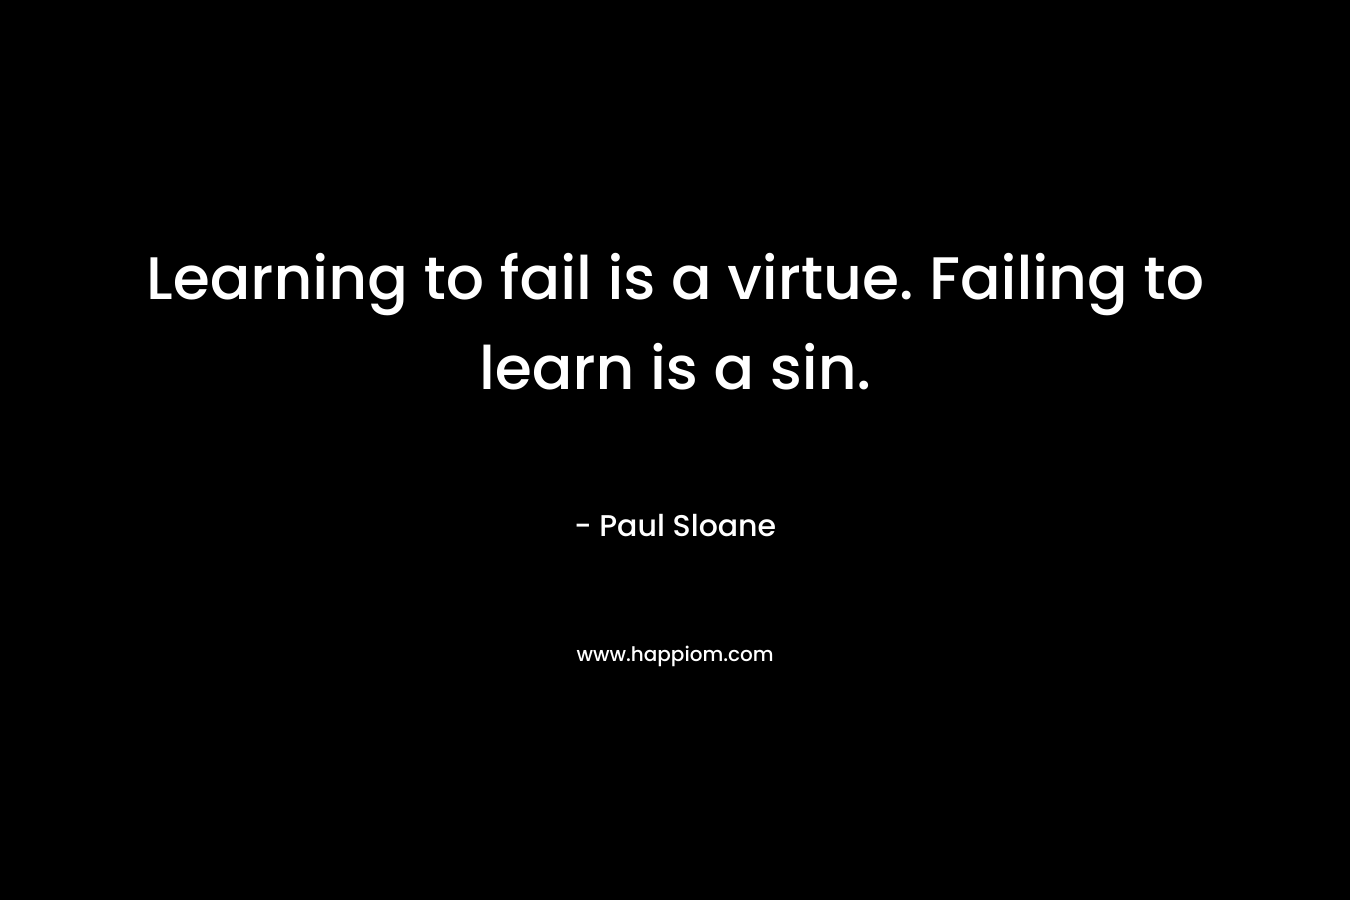 Learning to fail is a virtue. Failing to learn is a sin.